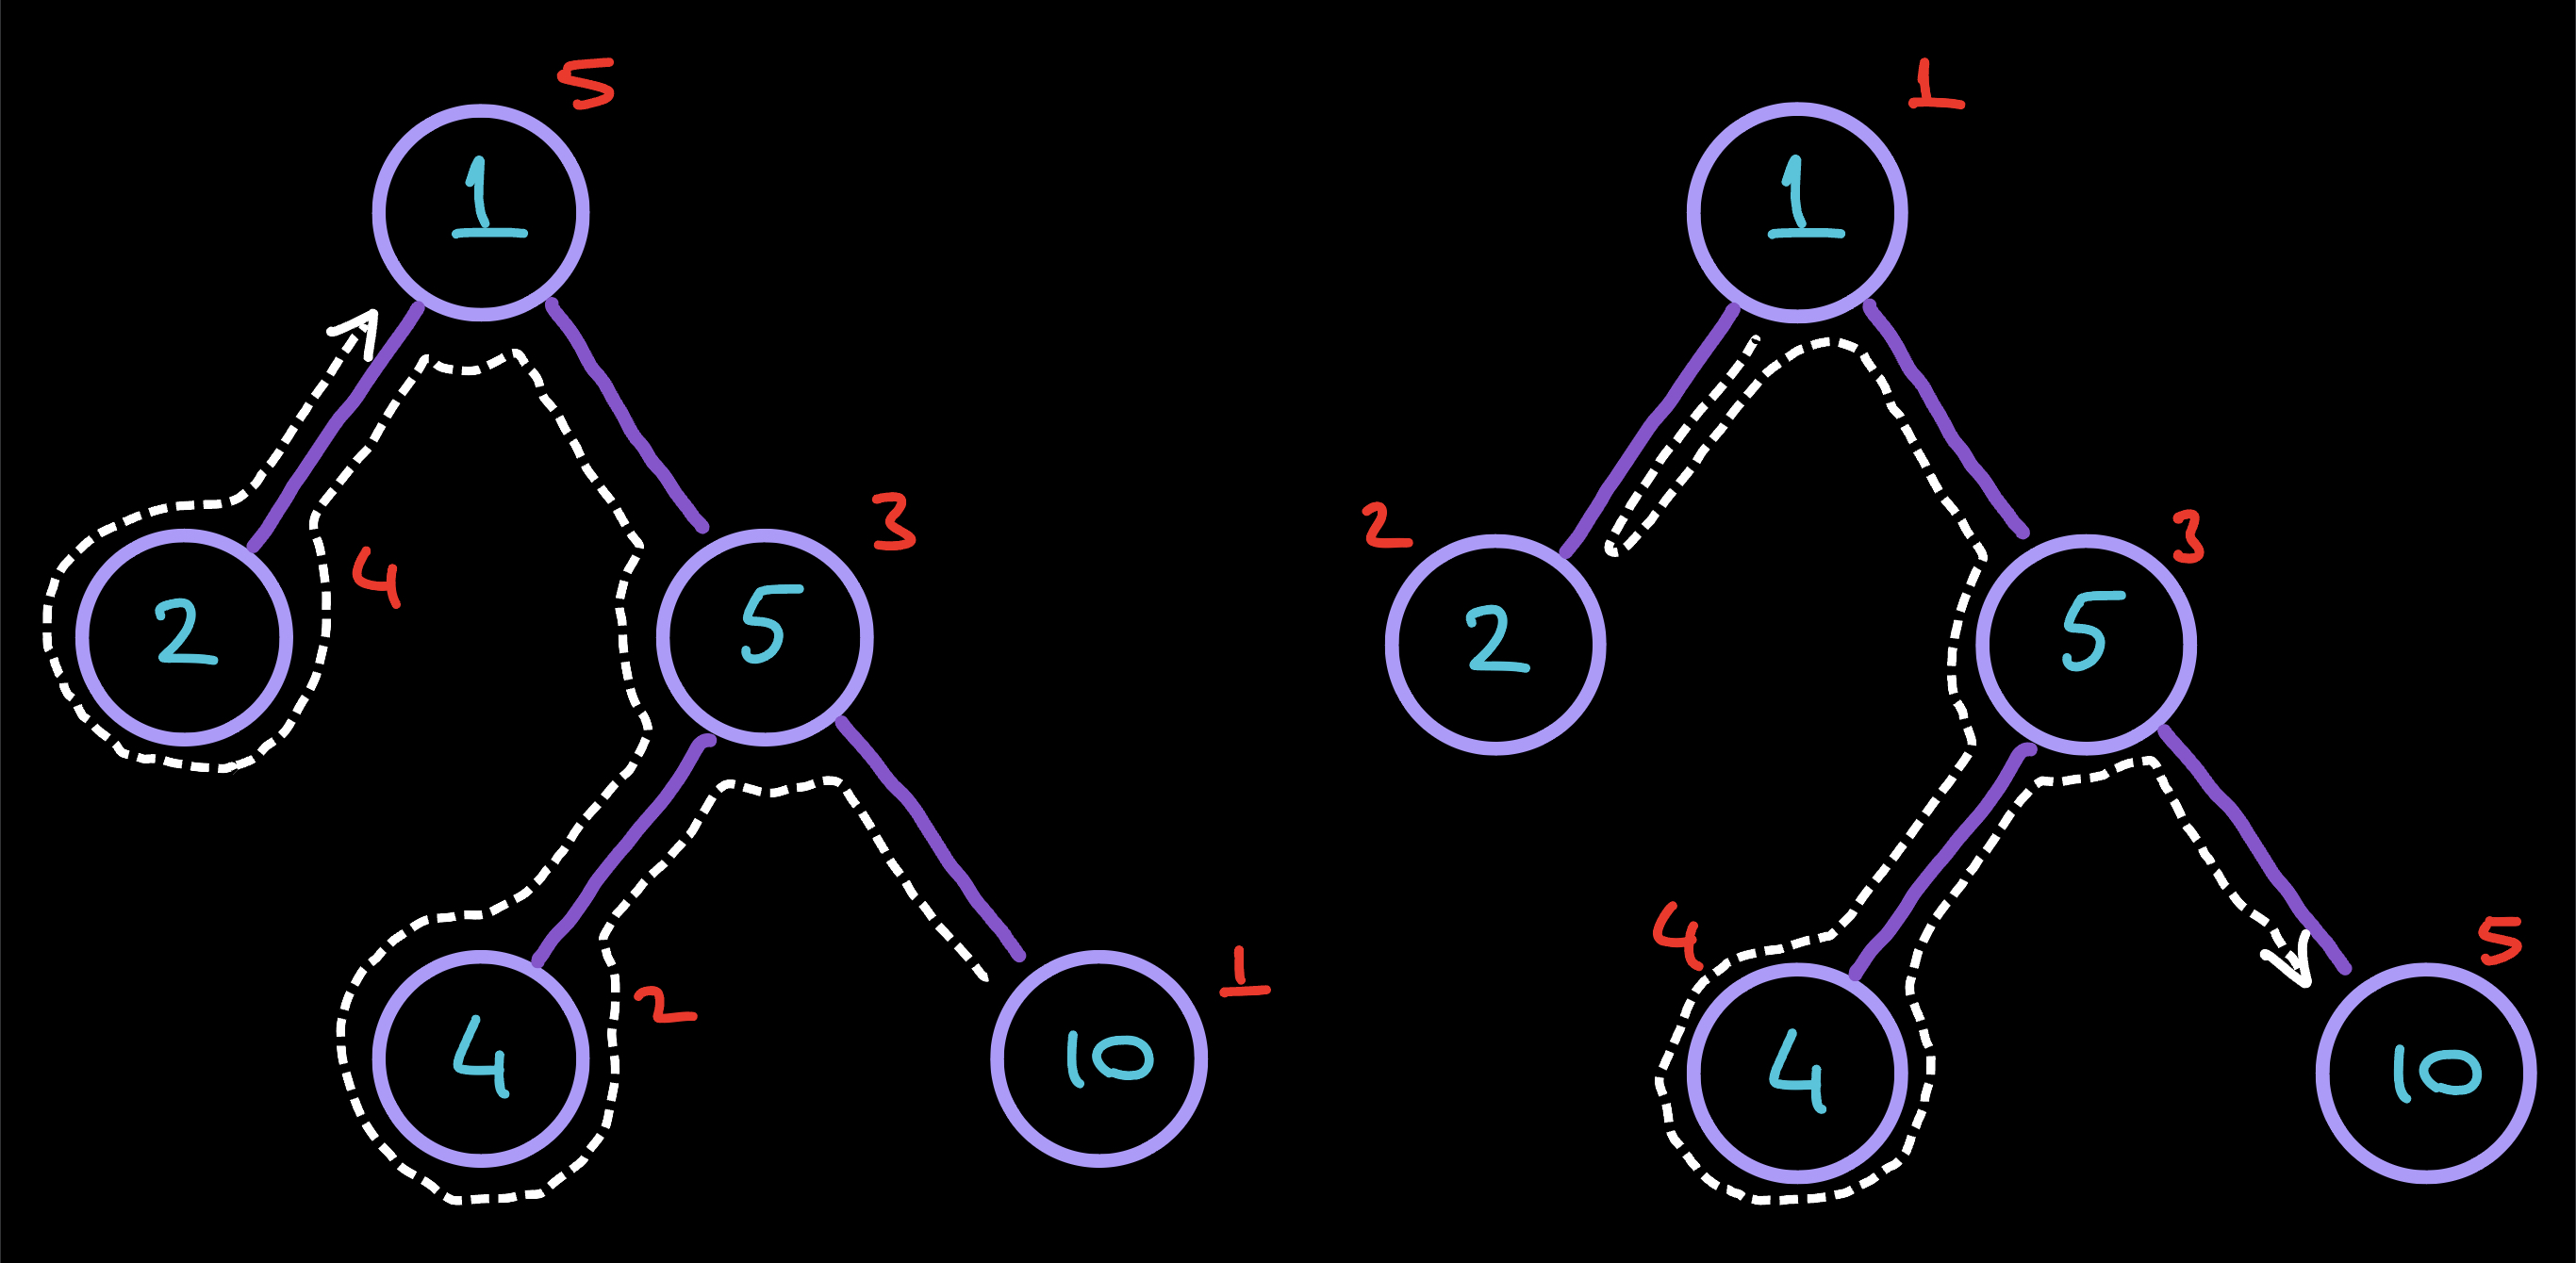 Node visiting order visualization in the same binary tree using post-order (left) and pre-order (right) algorithms